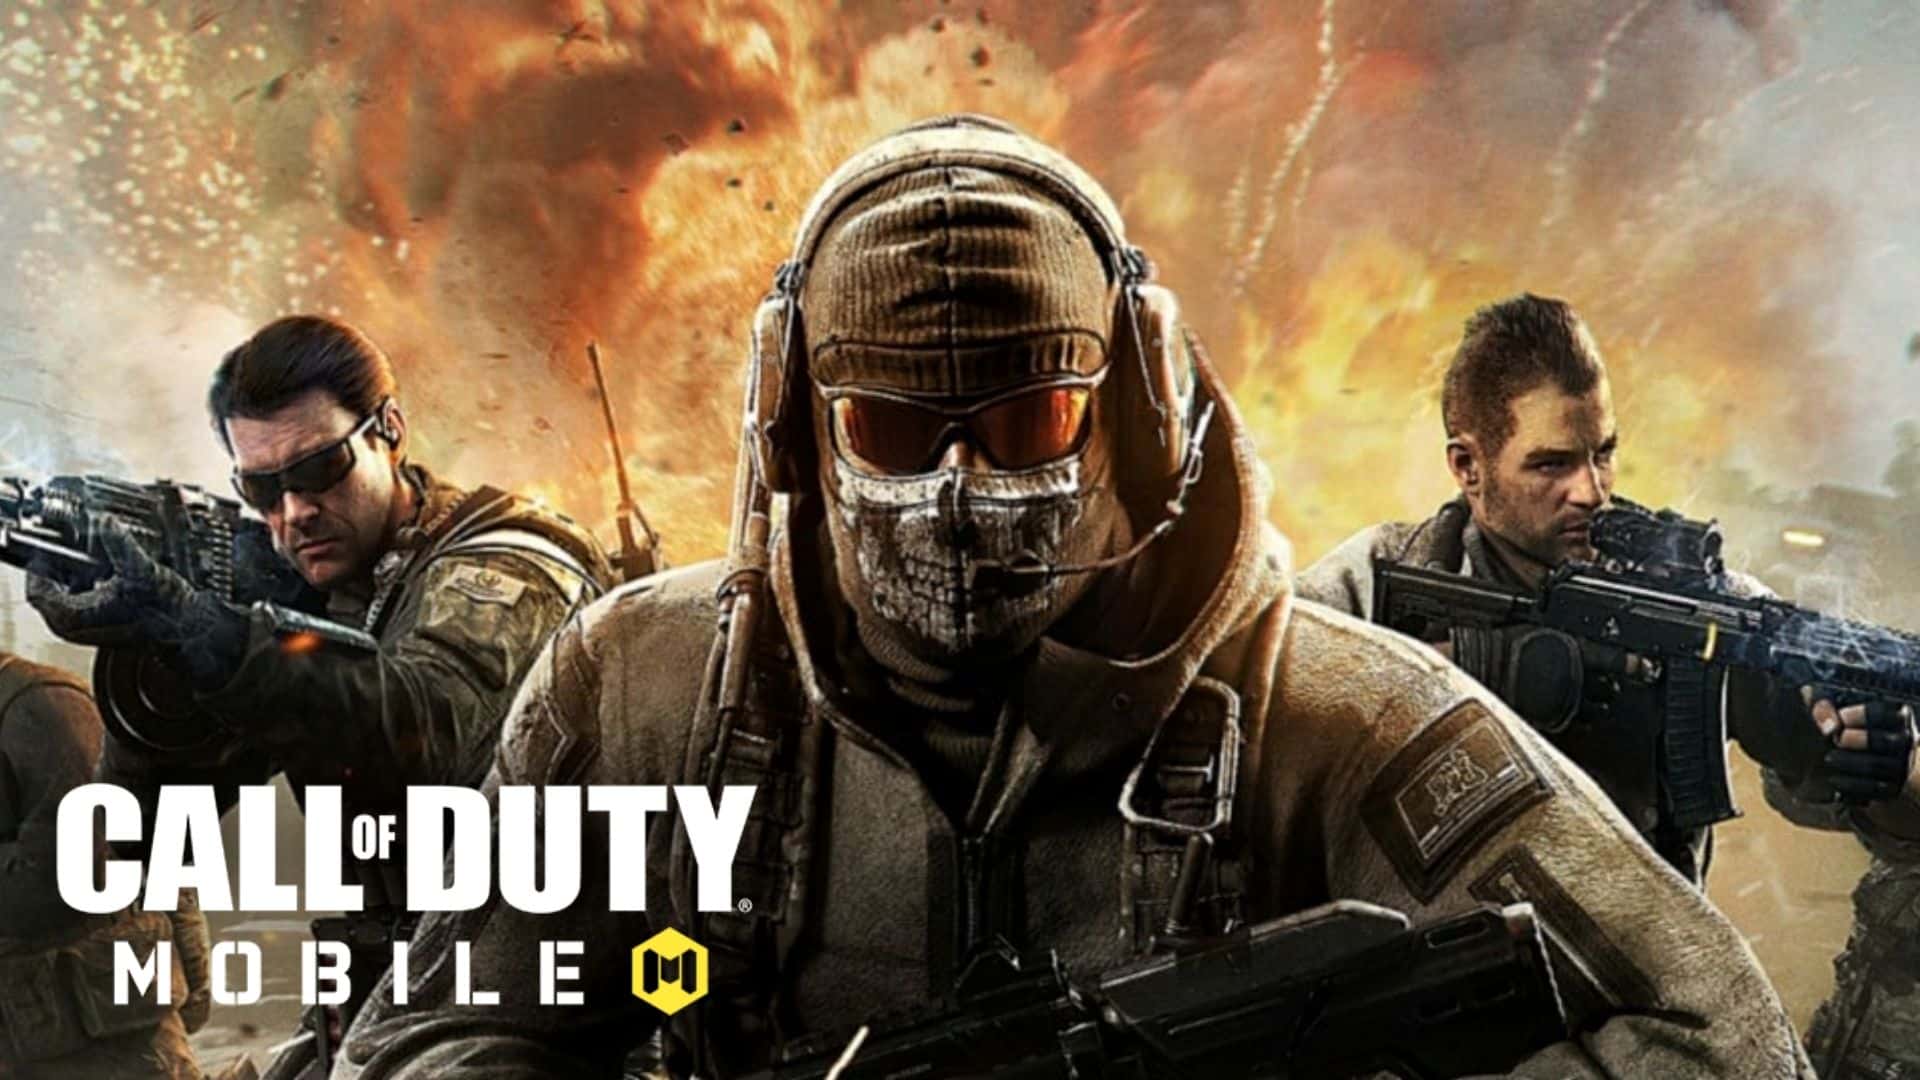 Call of duty 3 mobile